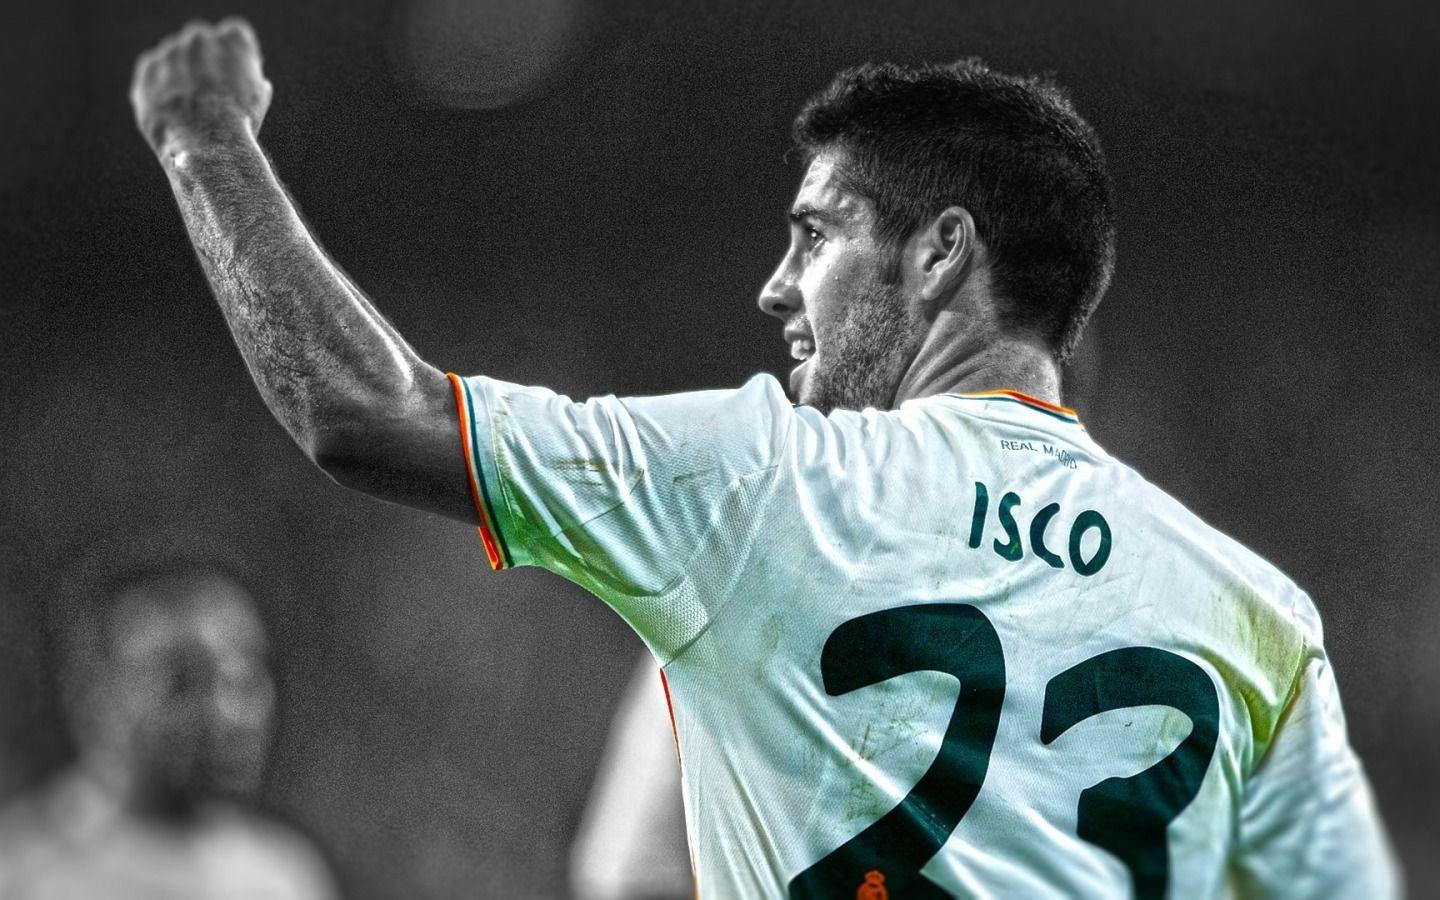 Download wallpaper Isco, ISCO, Real Madrid, Real Madrid, Isco